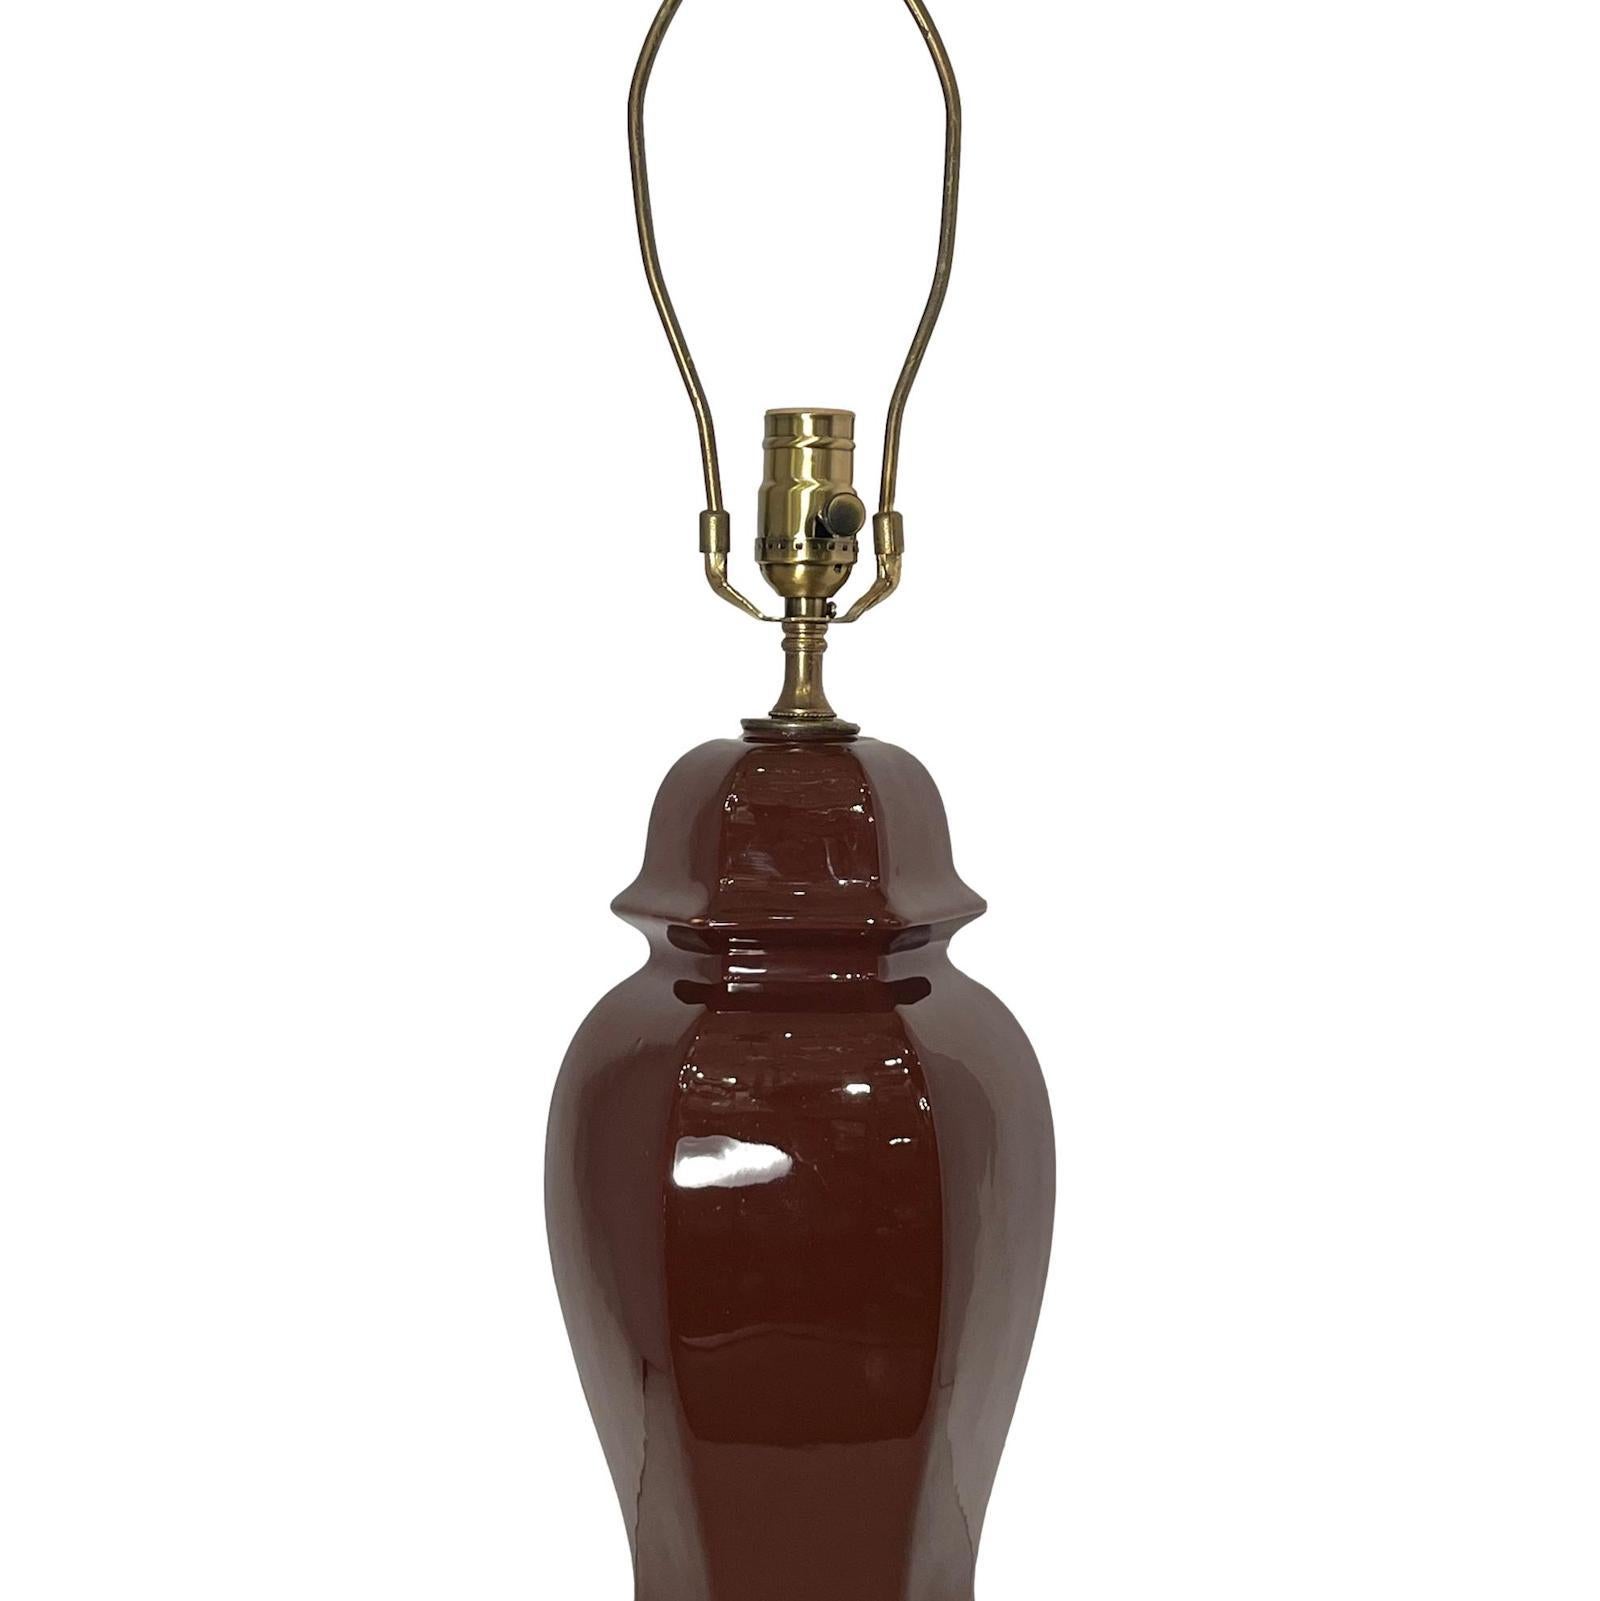 A circa 1960s Italian chocolate brown porcelain table lamp.

Measurements:
Height of body: 15